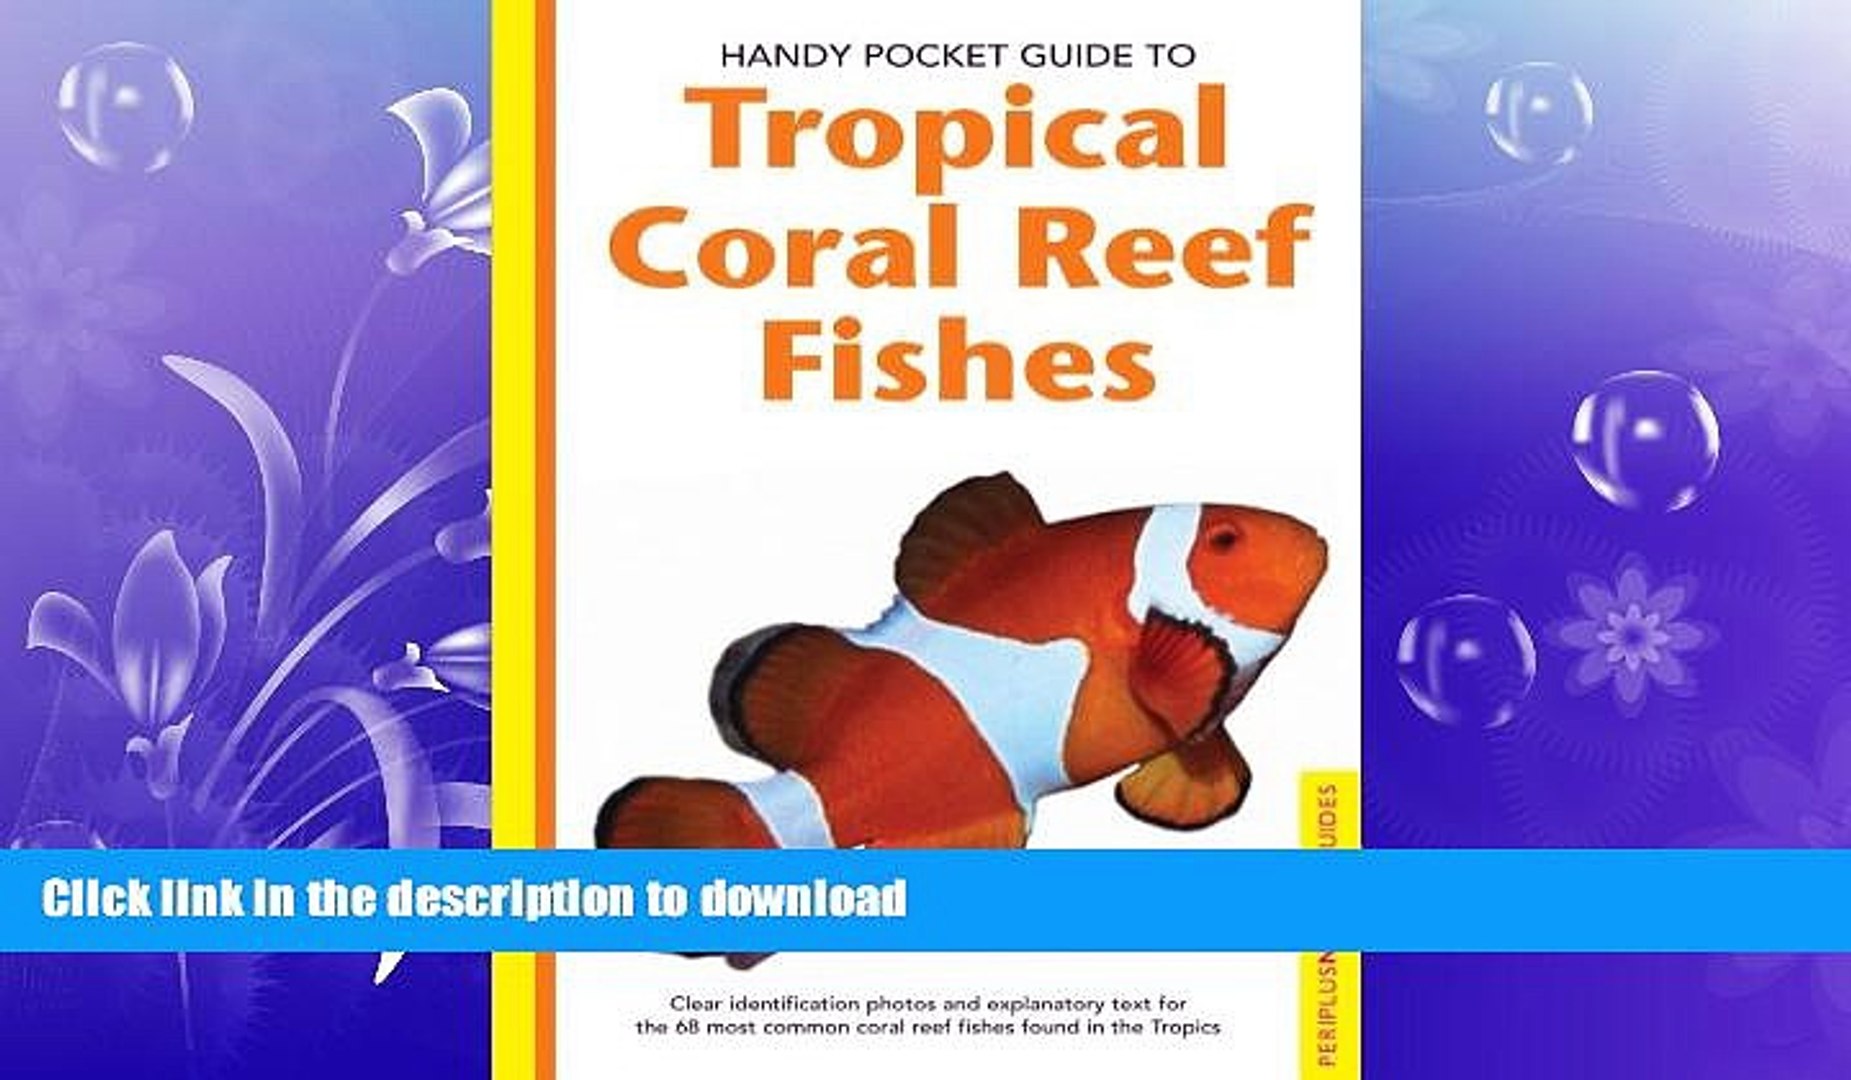 FAVORIT BOOK Handy Pocket Guide to Tropical Coral Reef Fishes (Handy Pocket Guides) PREMIUM BOOK